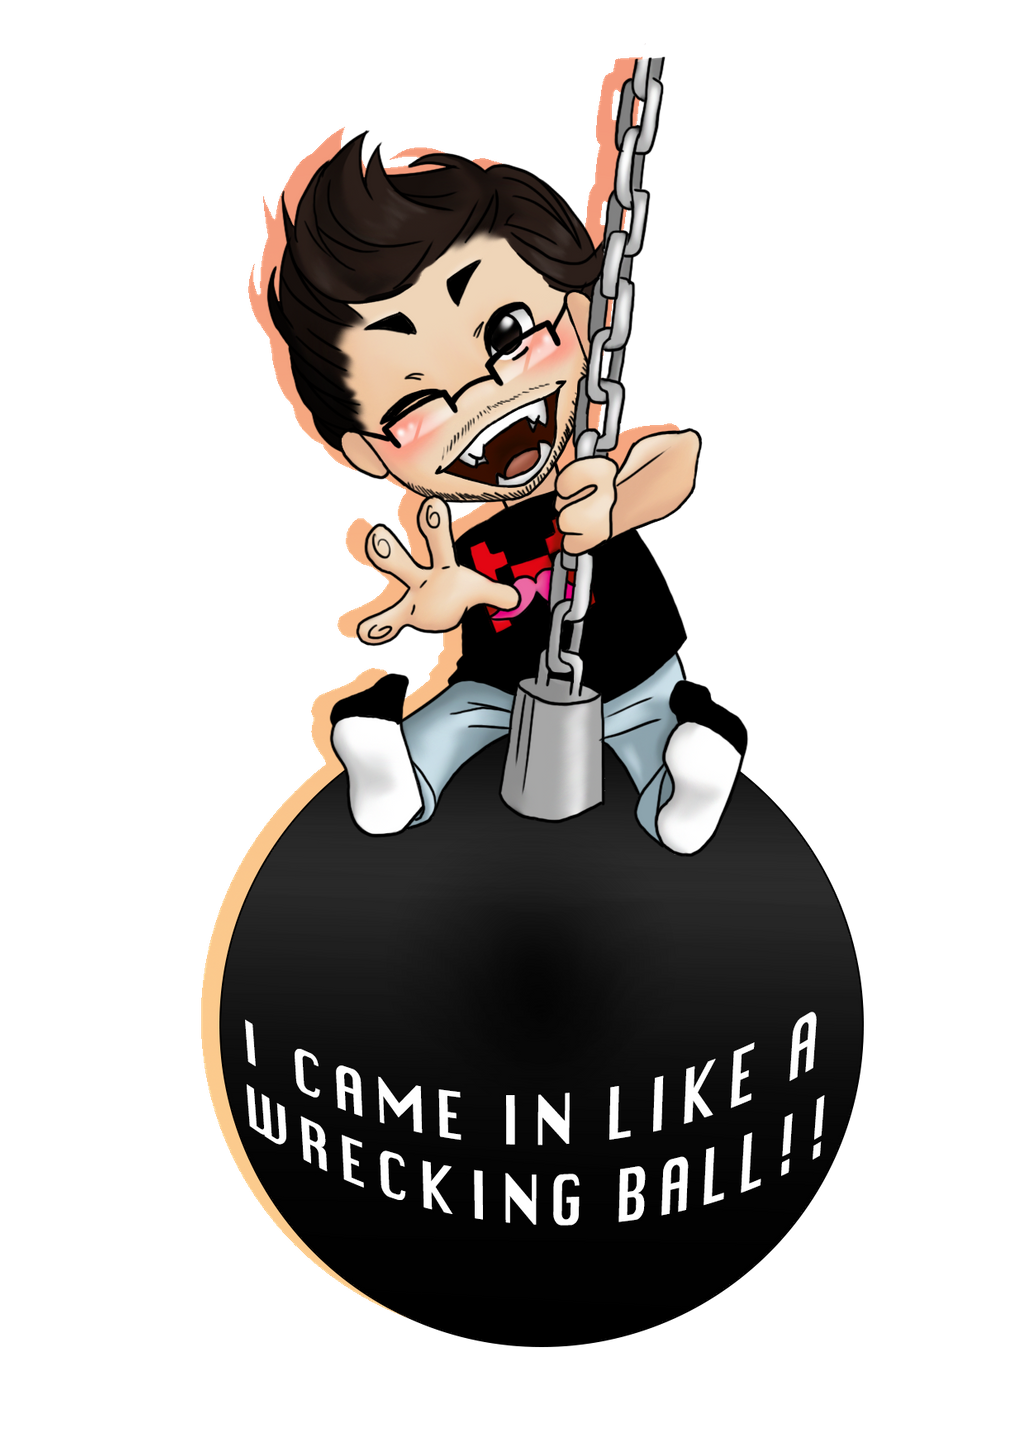 markiplier_came_in_like_a_wrecking_ball__chibi__by_sweet_optimus3_d8medxs-fullview.png